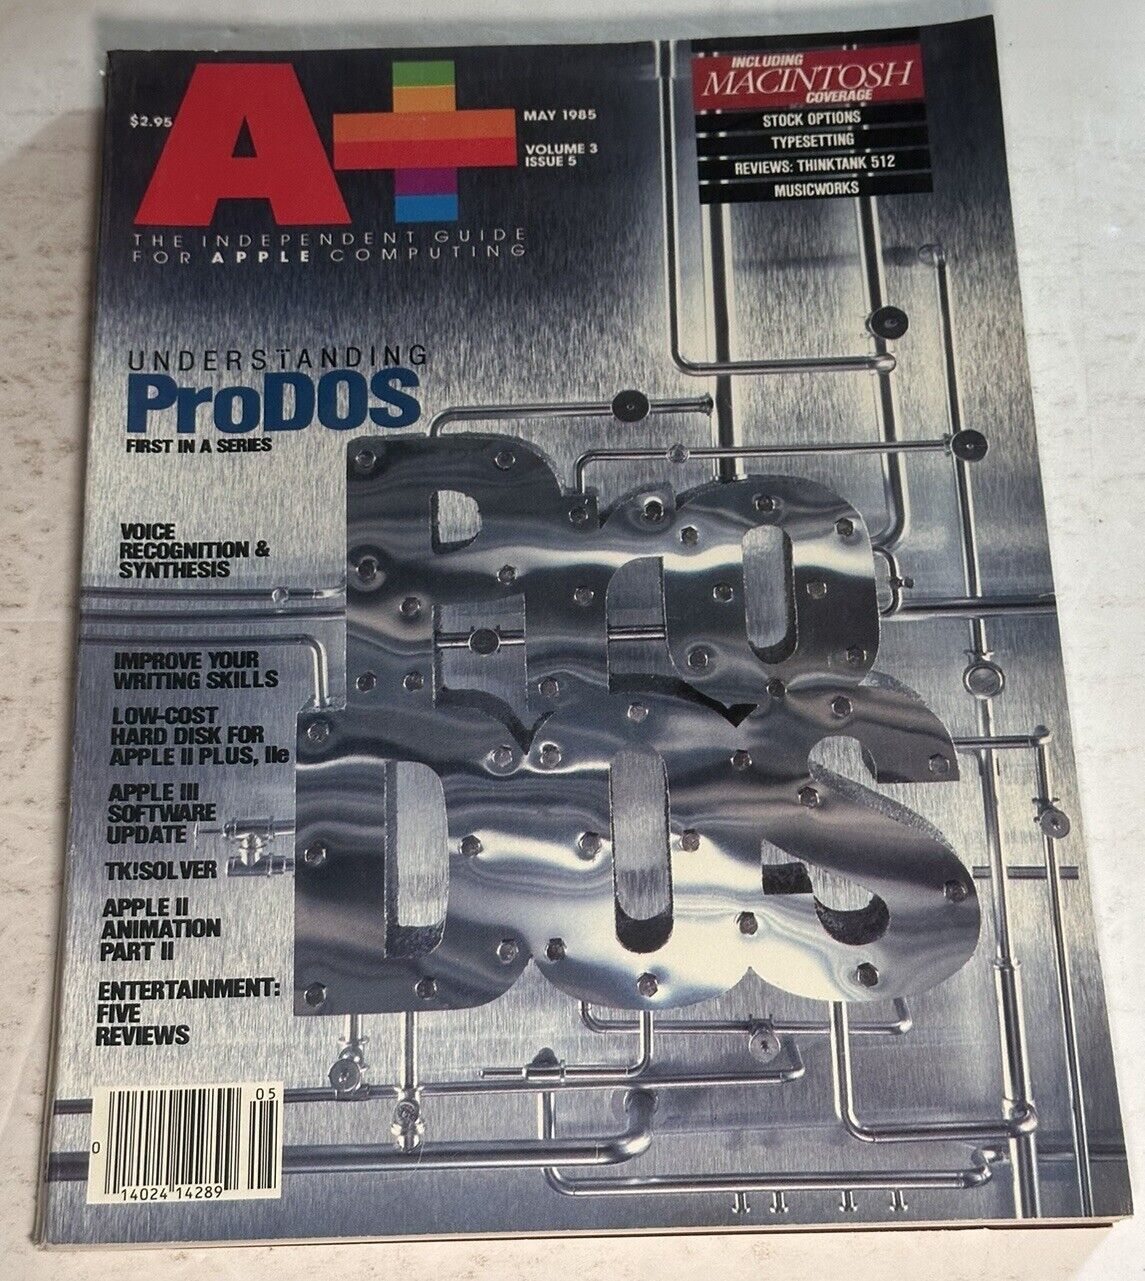 A+ The Independent Guide For Apple Computing May 1995 Vol. 3 Iss. 5 ProDOS